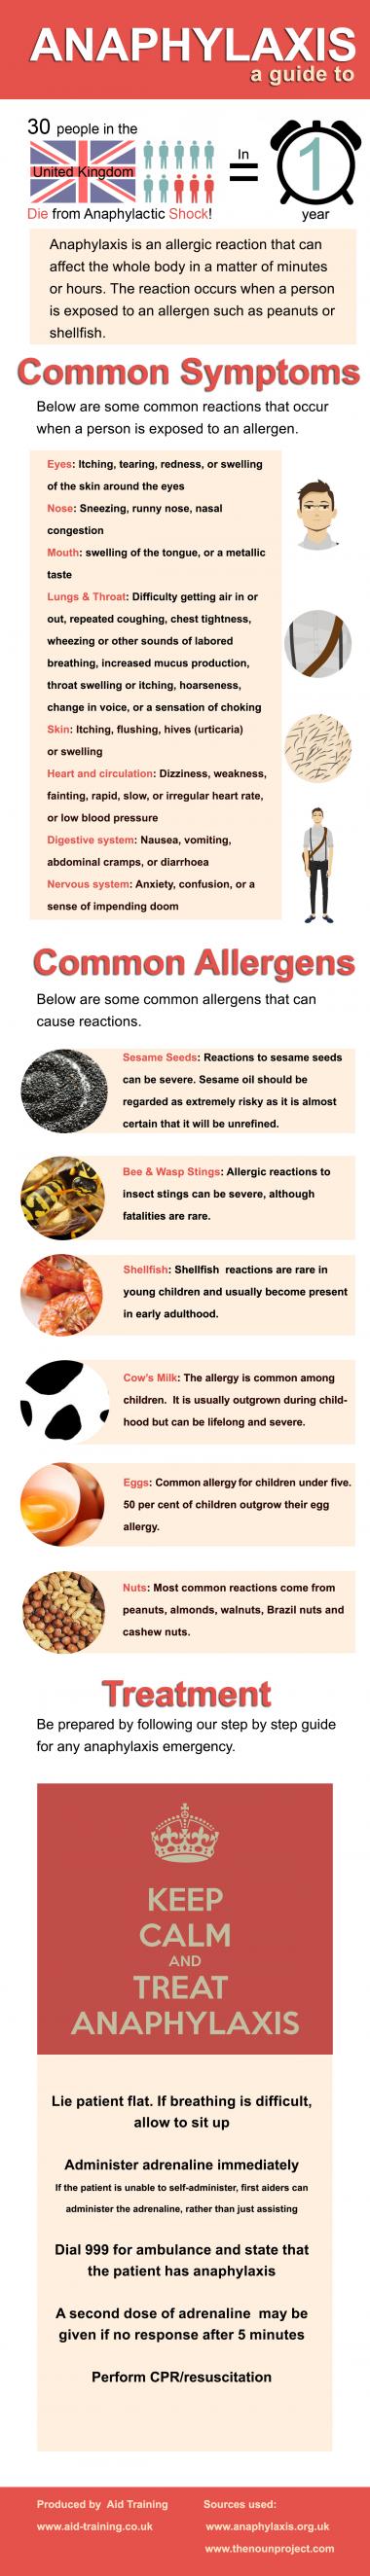 Infographic on Anaphylaxis